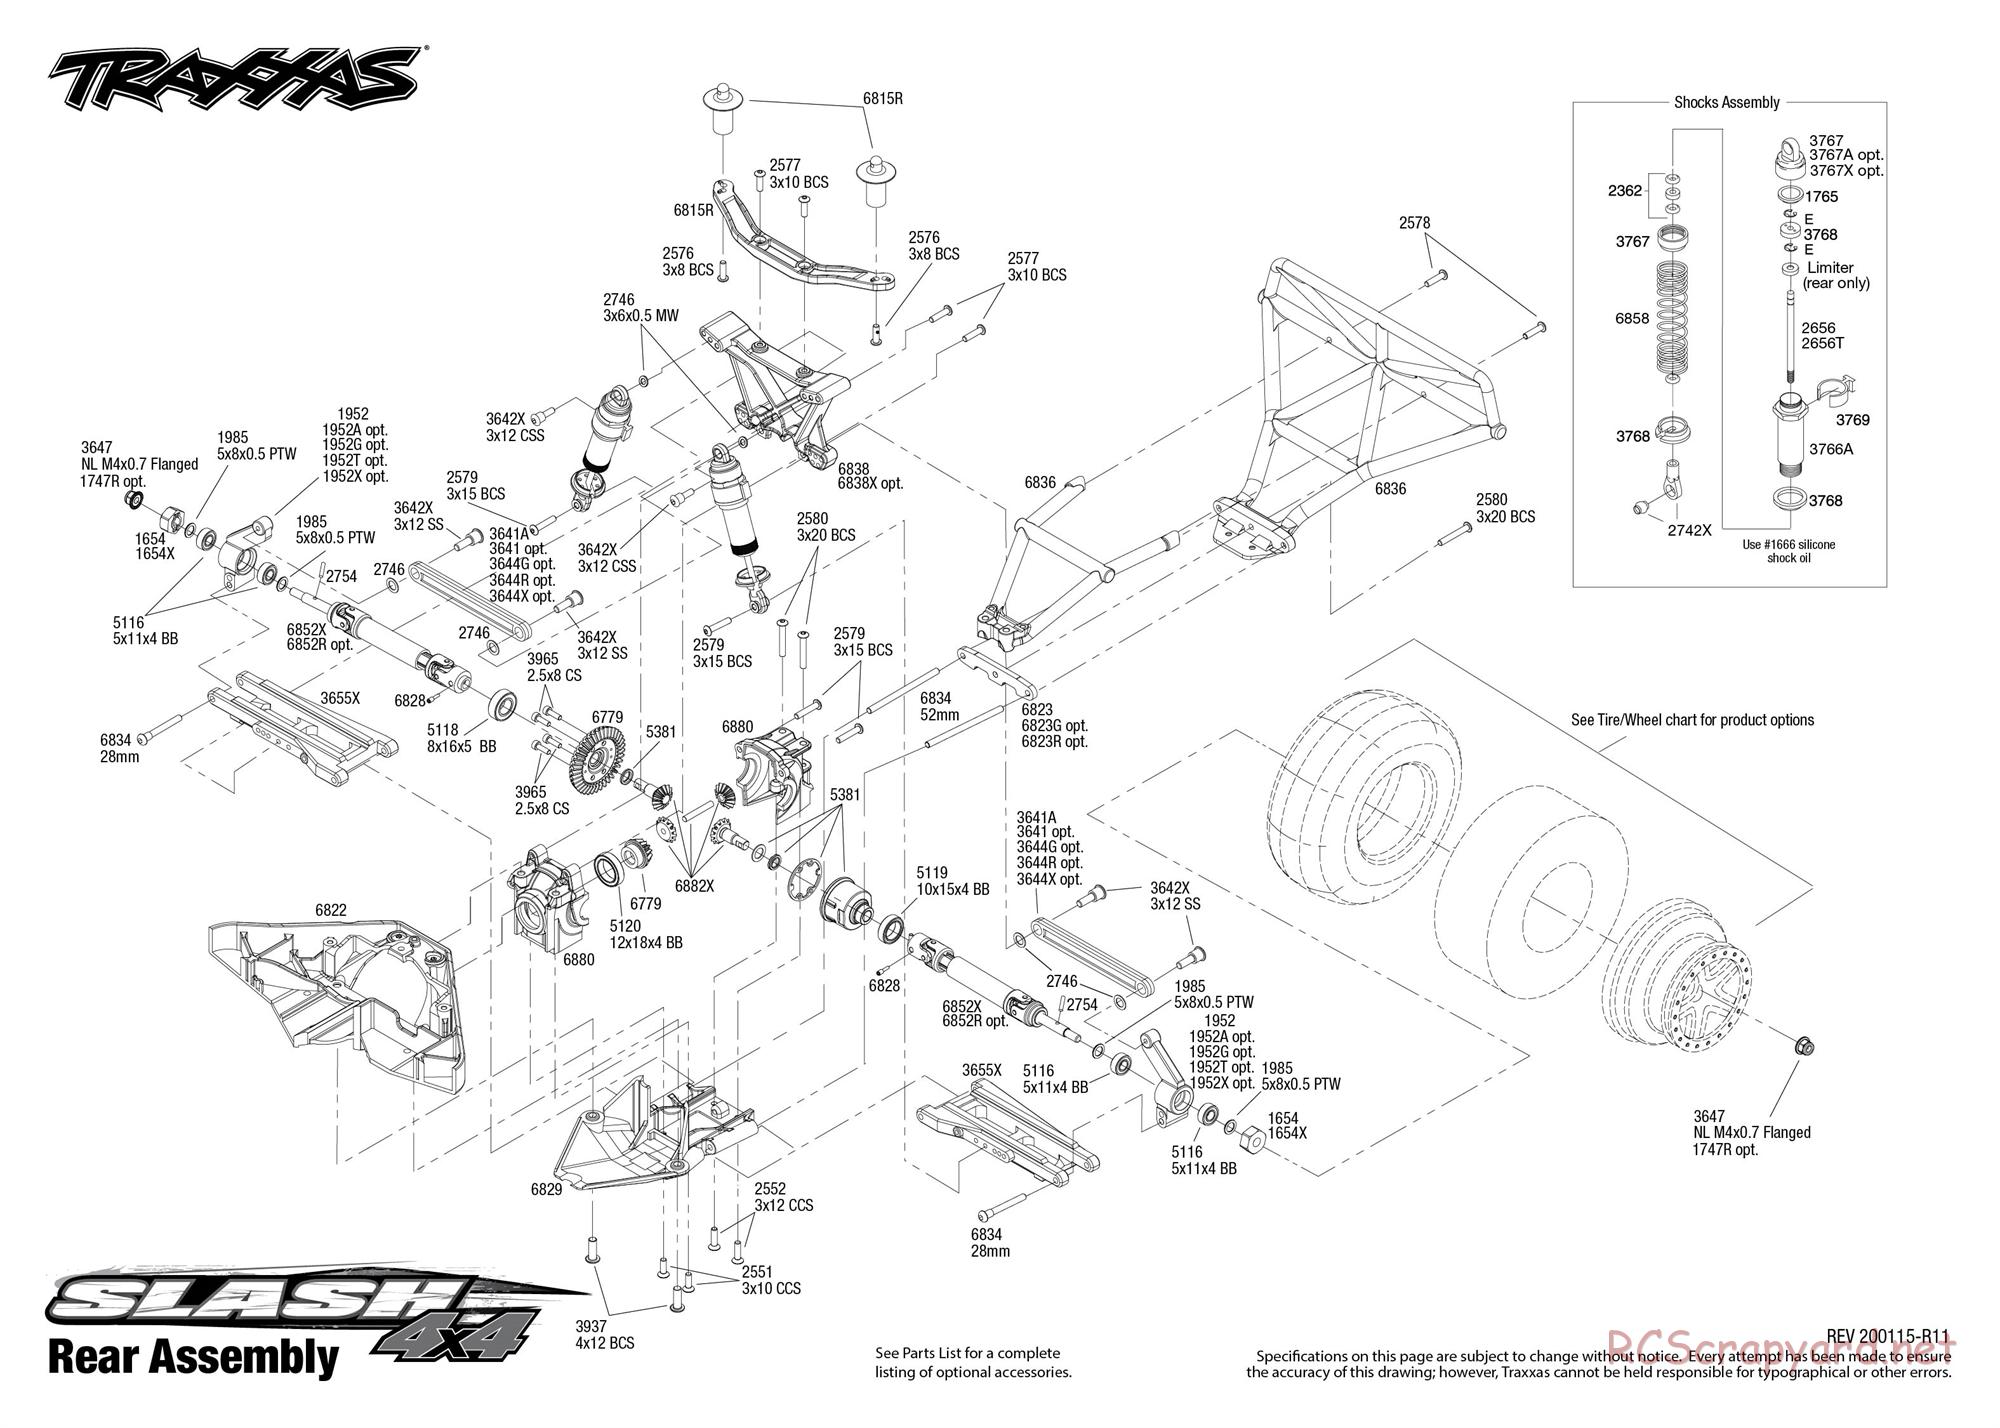 Traxxas - Slash 4x4 Brushed (2018) - Exploded Views - Page 4